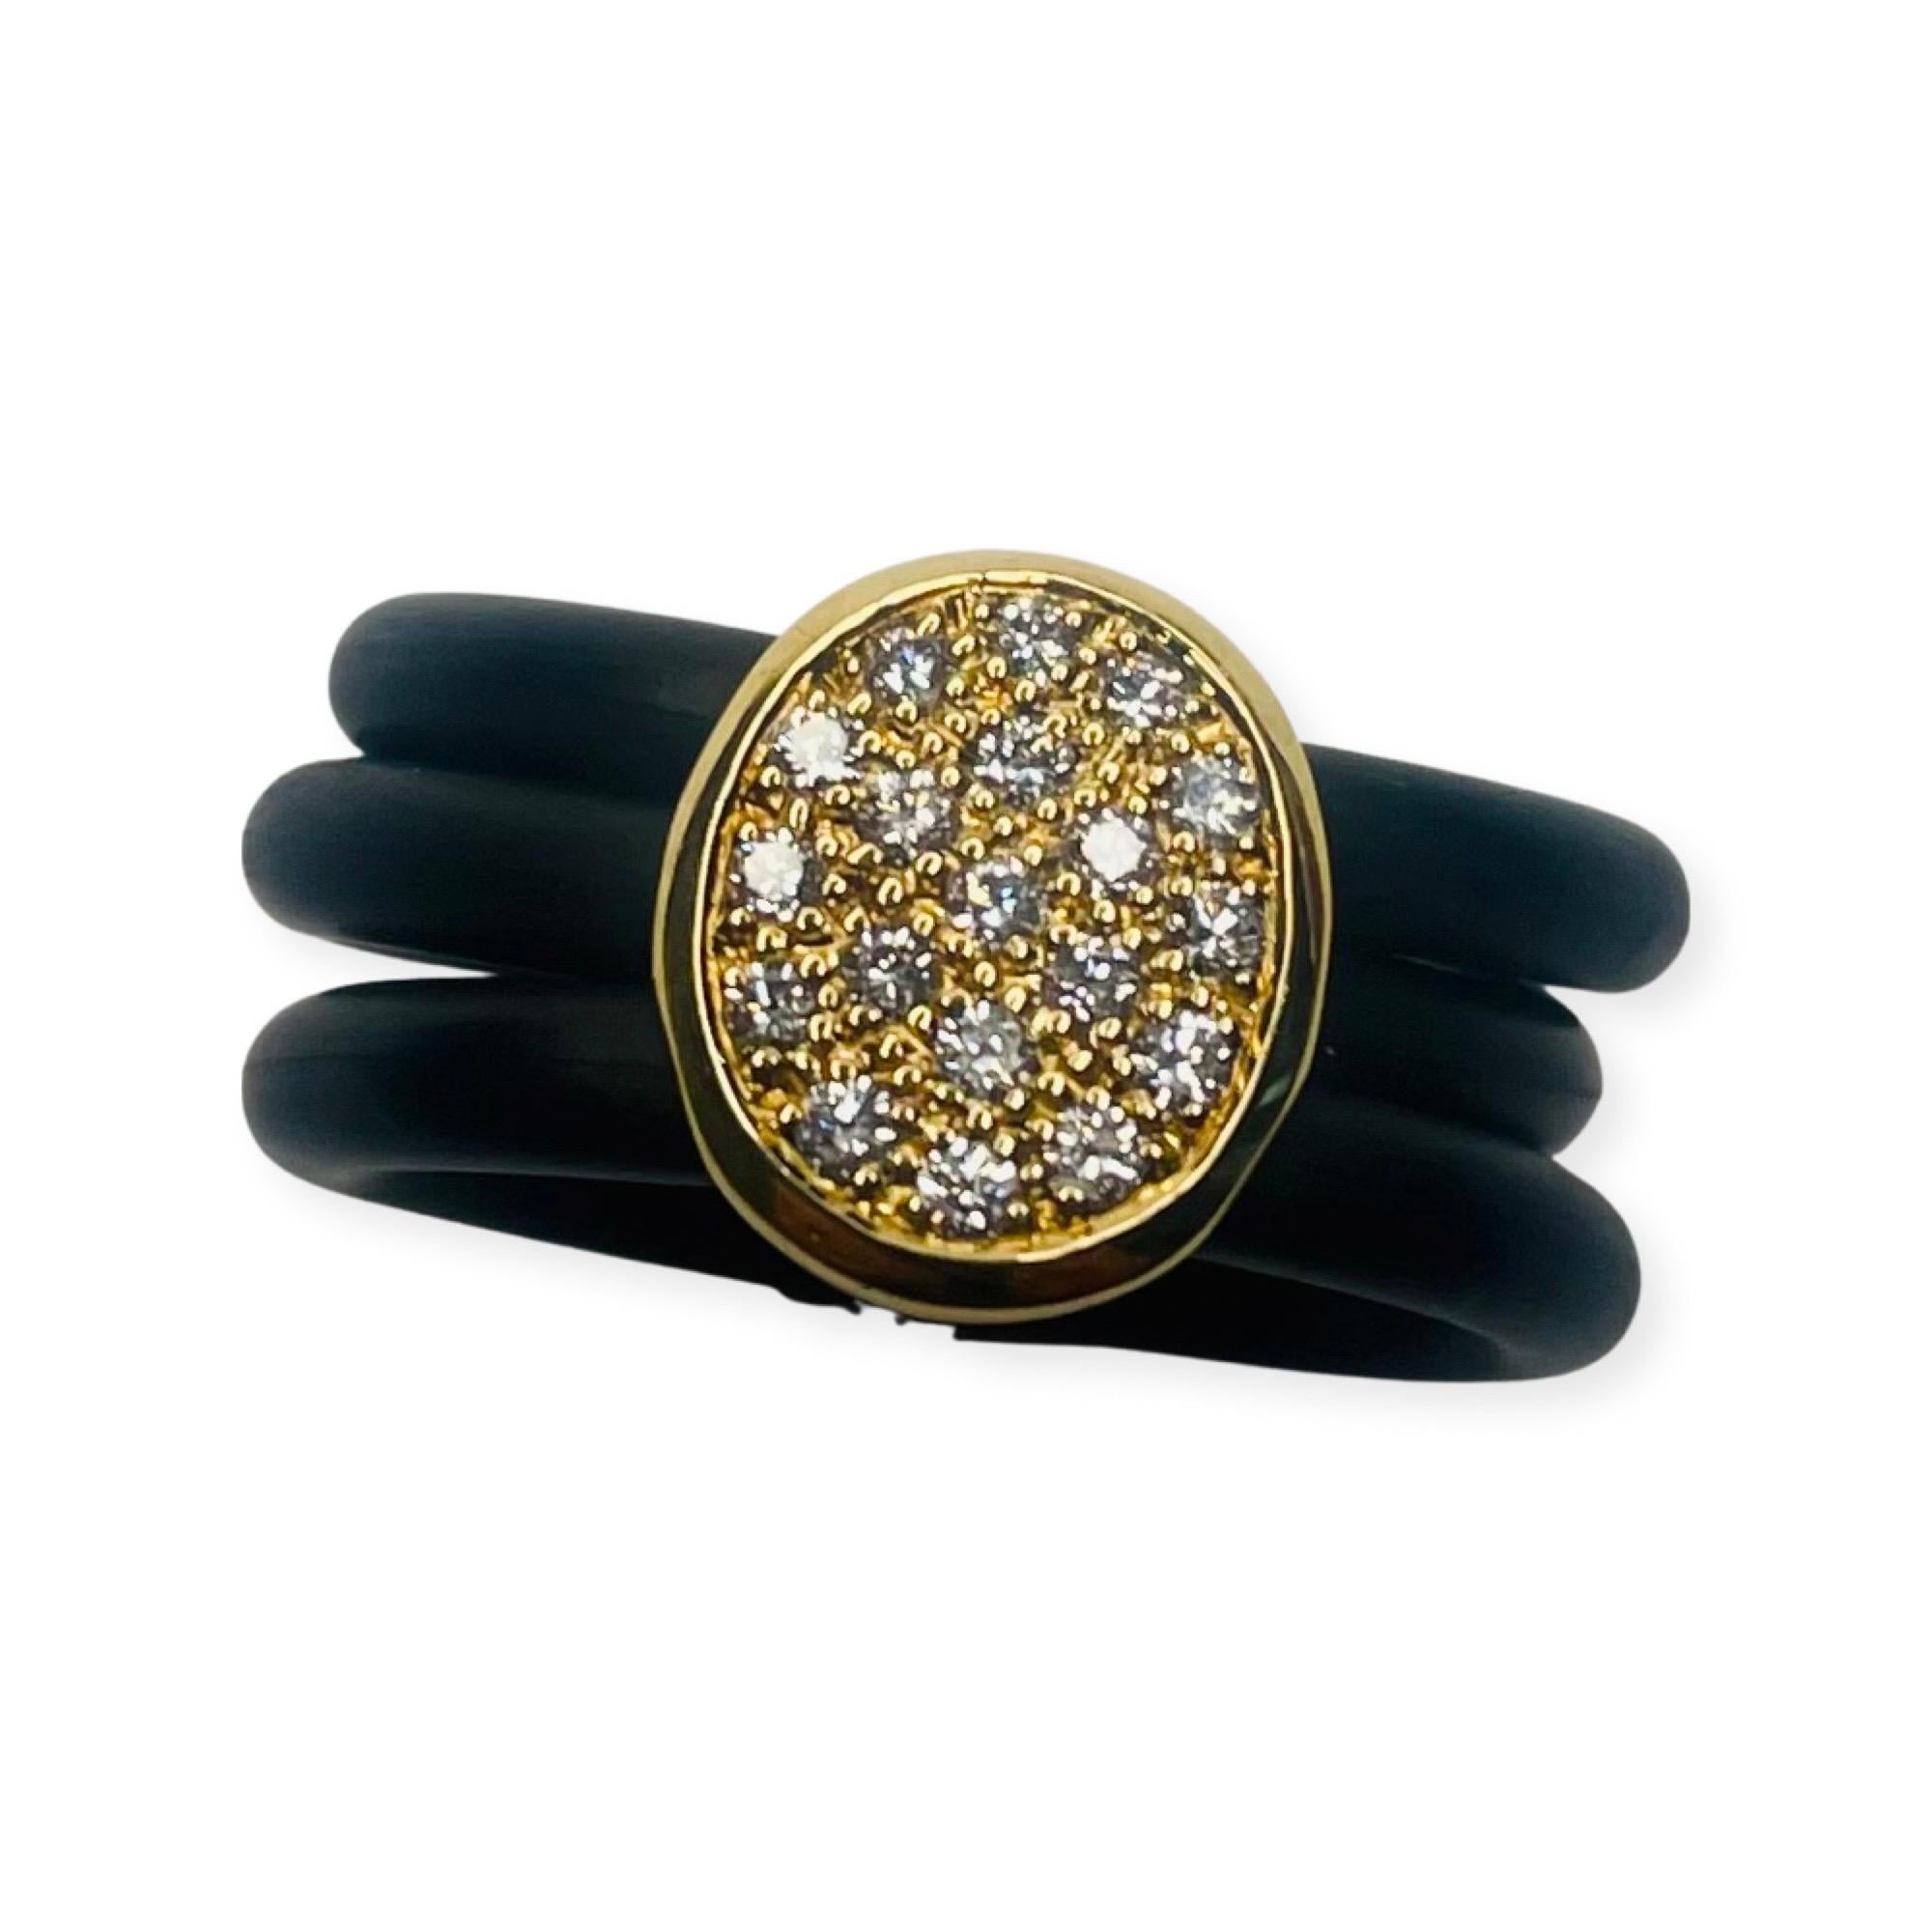 18K Yellow Gold and Rubber Cede Ring with Pave Set Diamonds.  There is a total diamond weight of 0.285 cts. The diamonds are of VS Clarity and GH Color. The shank is 8.25 mm wide with a triple row of rubber rings.  The top is oval 18KY Gold and